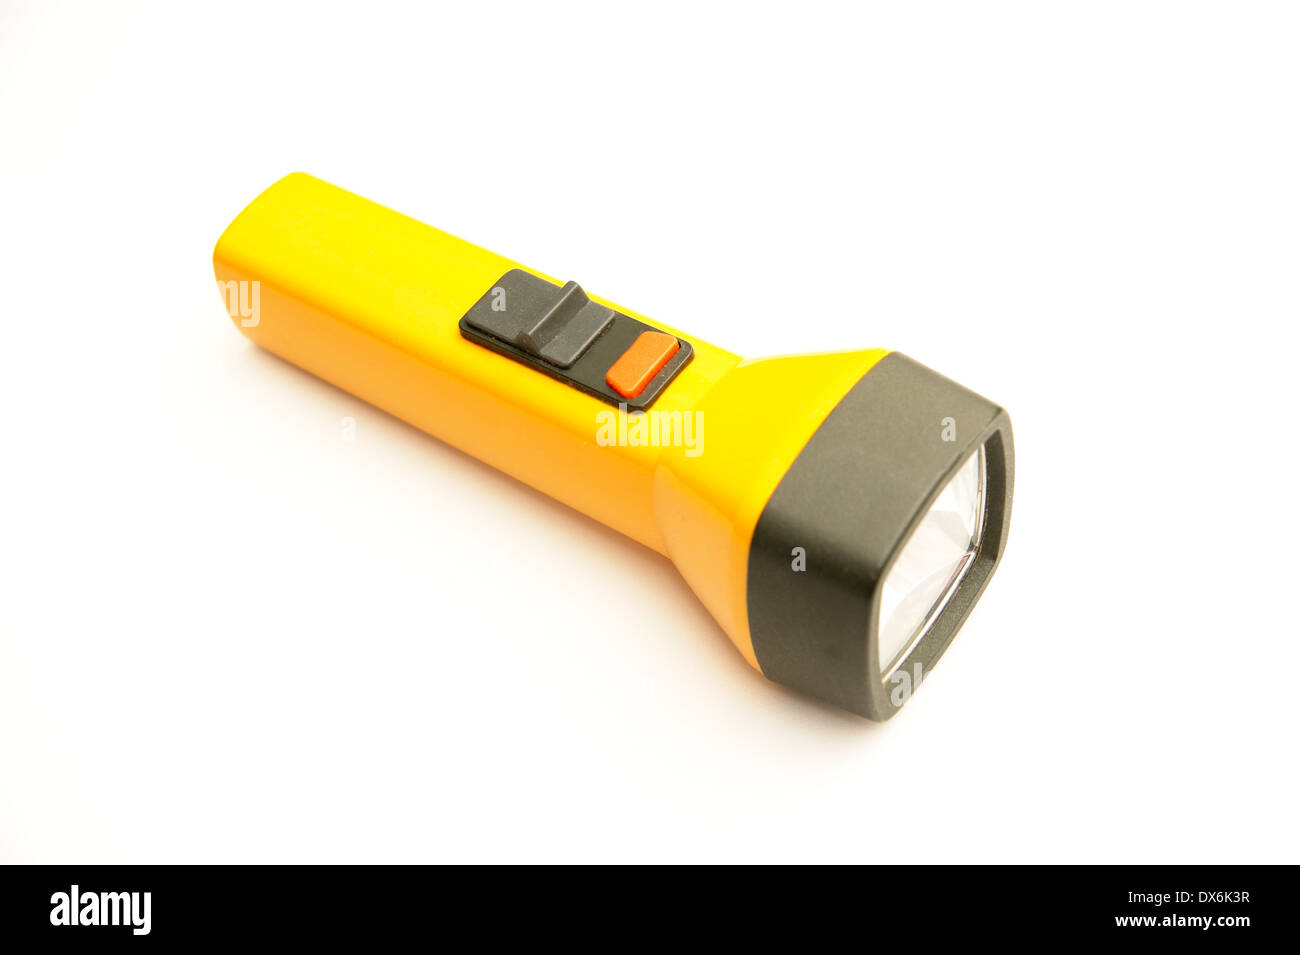 https://c8.alamy.com/comp/DX6K3R/battery-powered-hand-torch-on-a-white-background-DX6K3R.jpg